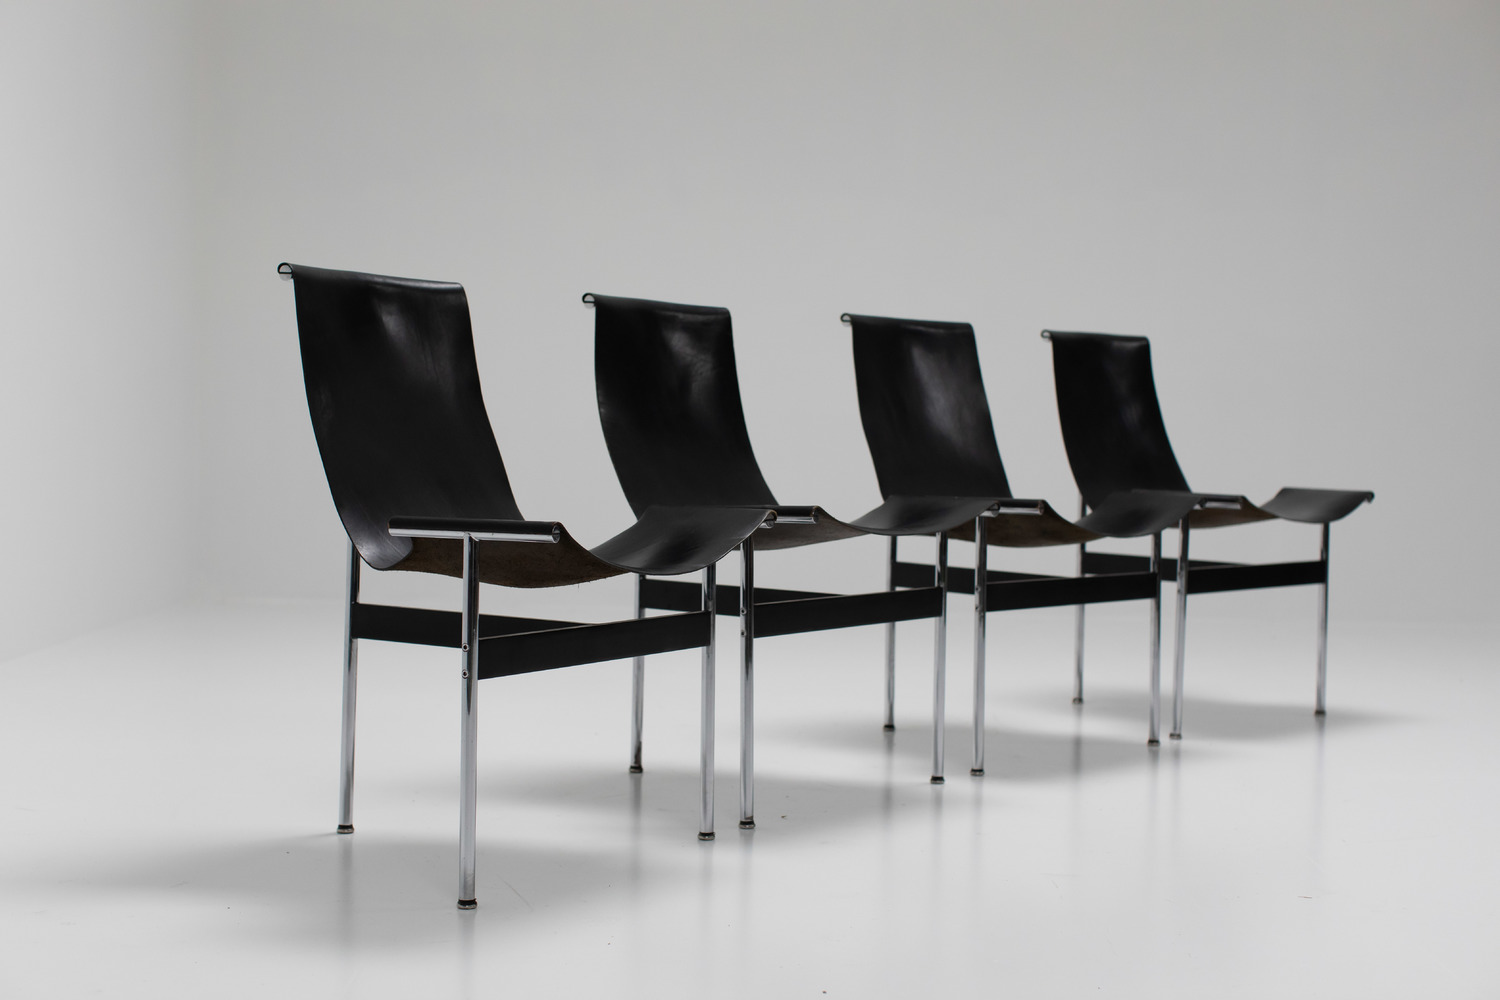 Set of 4 T-chairs by Katavolos and Laverne